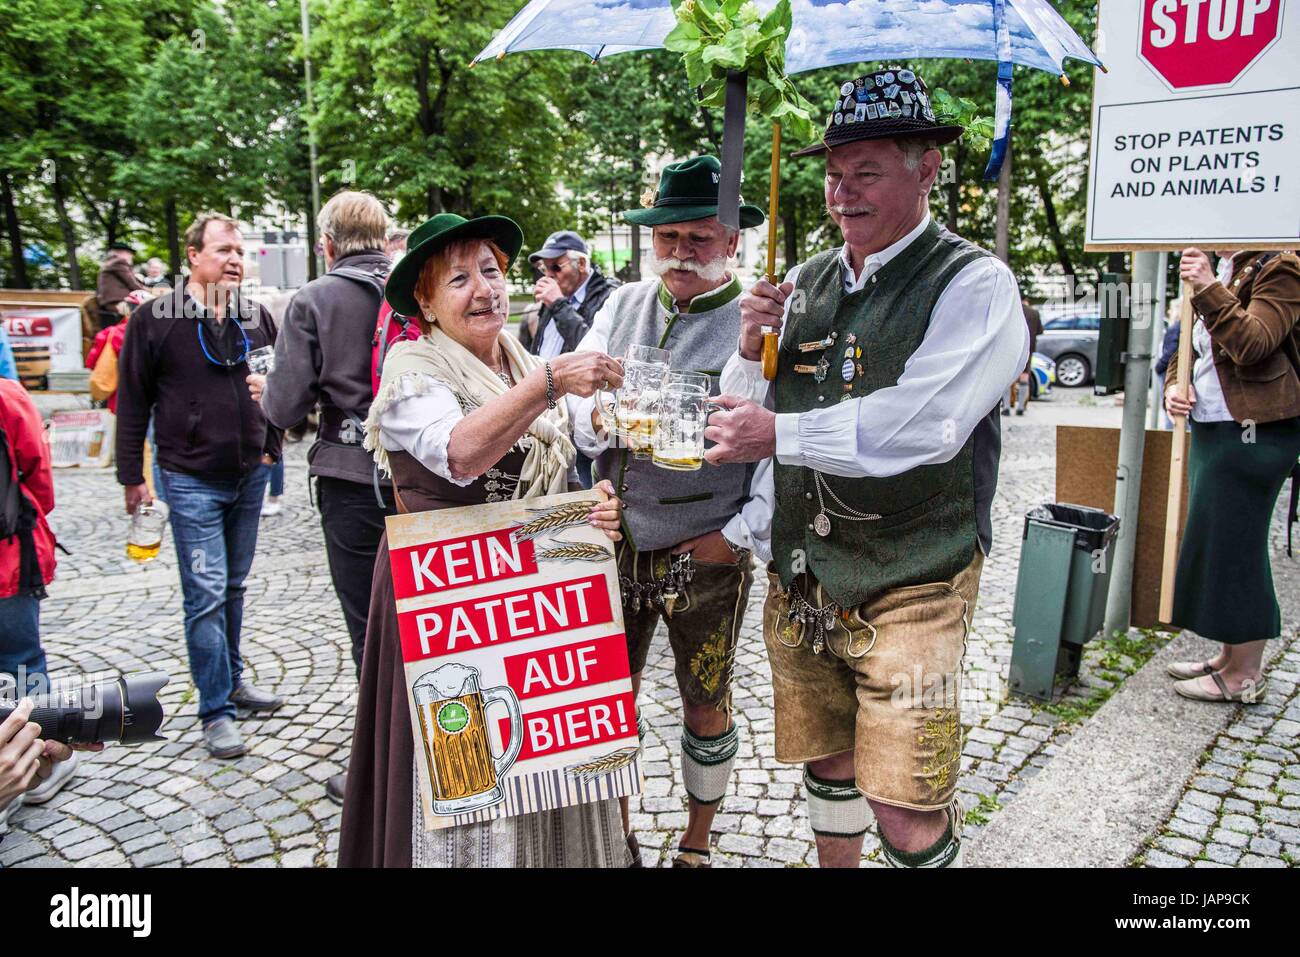 Munich. 7th June, 2017. Approximately 40 protestors assembled at the European Patent Office in Munich, Germany, in order to protest against further patenting of grains used in beer production. In 2016, Carlsberg and Heineken had both secured such patents. The demonstration was organized by the "Buendnisse Keine Patente auf Saatgut"", who alleges that those who obtain patents on living materials would not only have control of genetically-modified stocks, but also over naturally-produced and selected materials. They furthermore allege misuse of the patent system.Several representatives wen Stock Photo